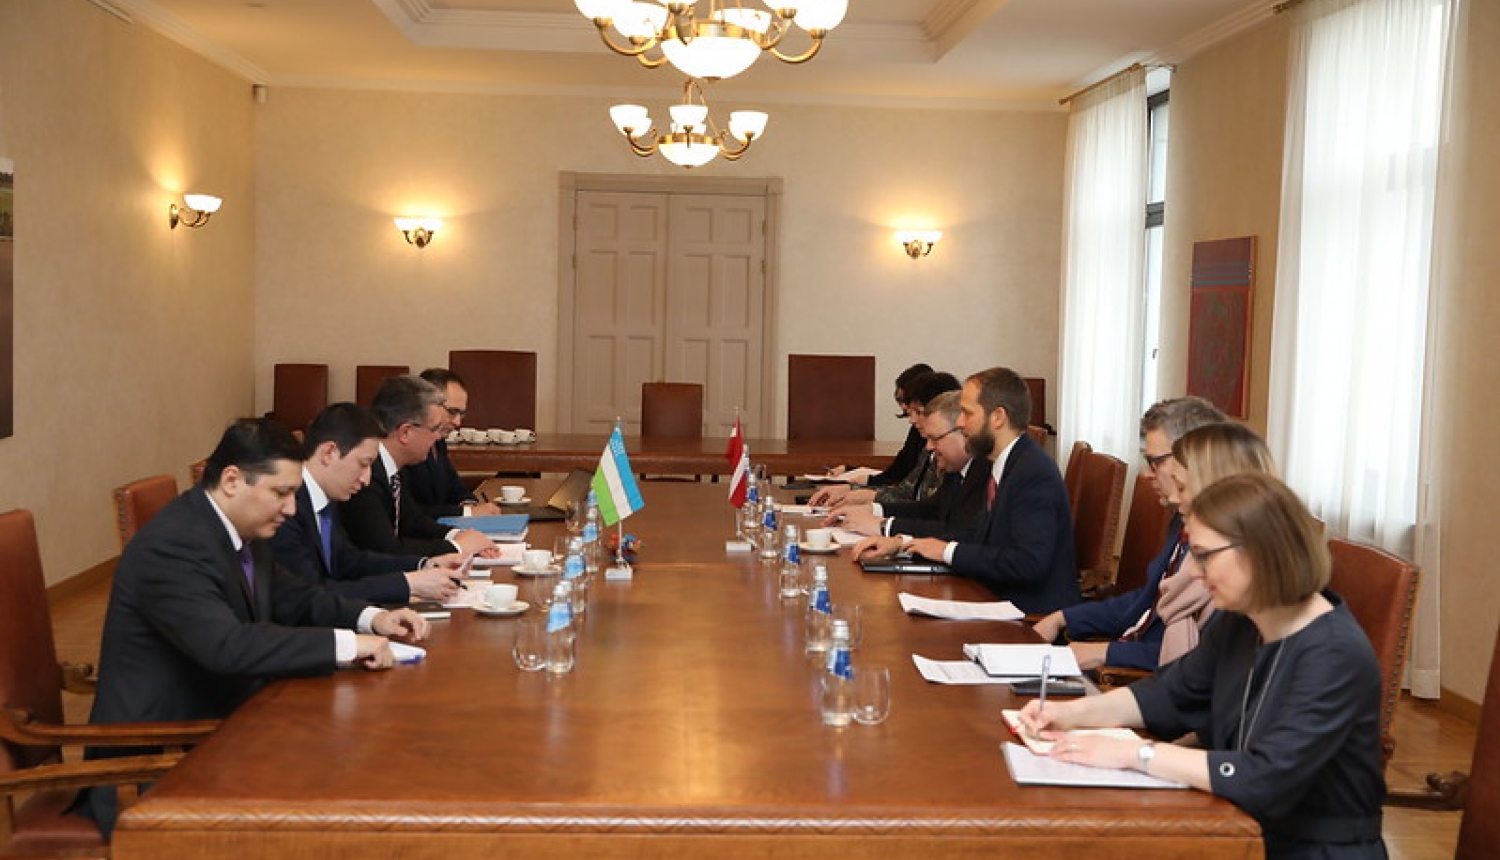 Representatives from the Foreign Ministries of Latvia and Uzbekistan discuss prospective areas for cooperation